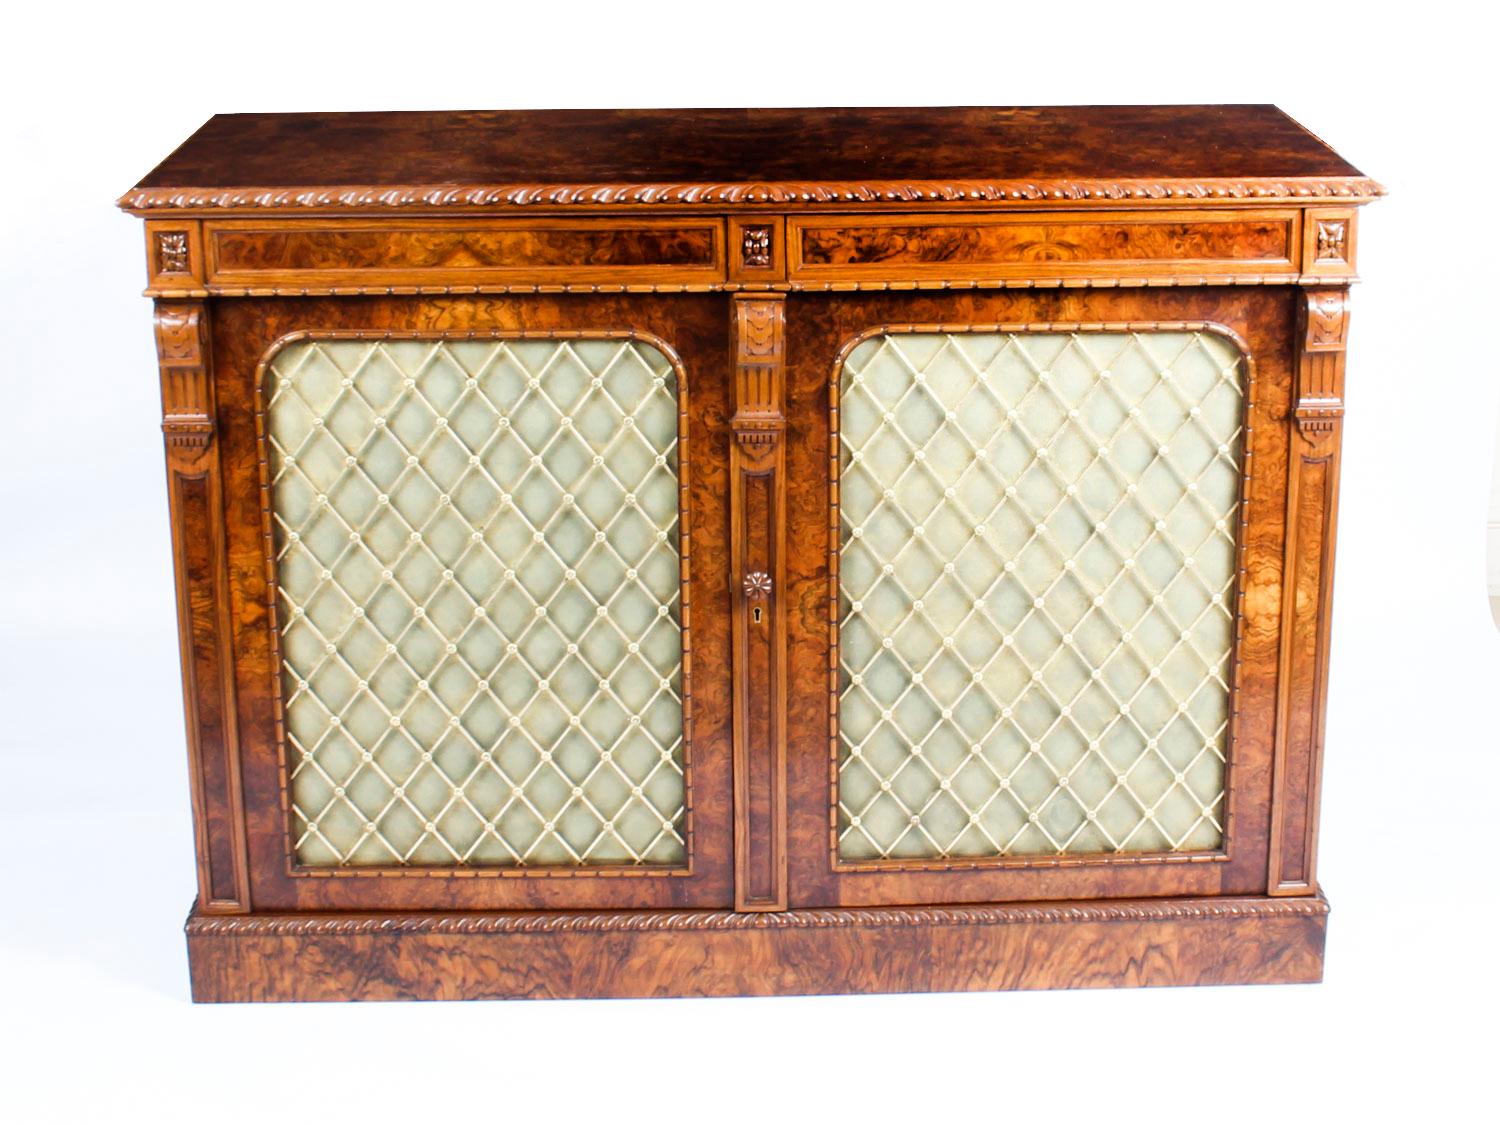 A superb quality antique William IV burr walnut chiffonier, circa 1830 in date.
 
This stupendous and rare burr walnut chiffonier has a rectangular top with a stunning hand carved beaded border. It has a useful pair of frieze drawers above a pair